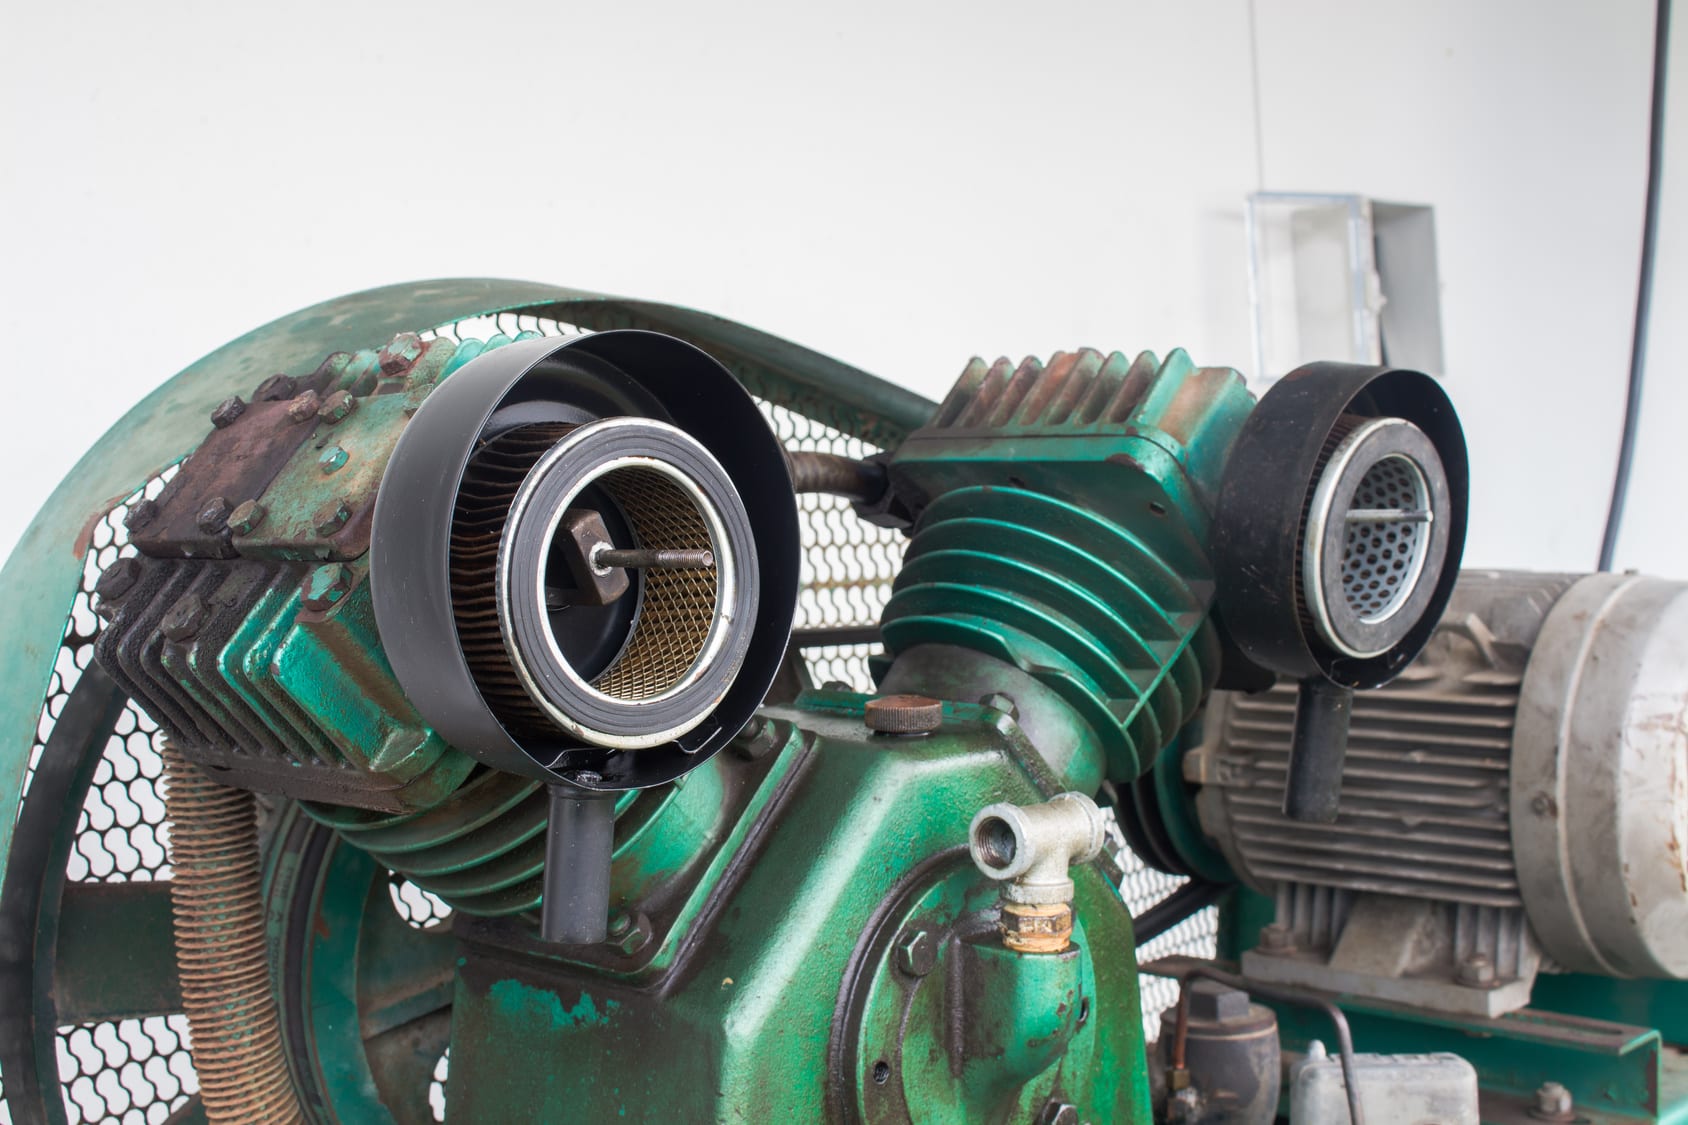 Check out these tips for caring for industrial air compressors with APEC.